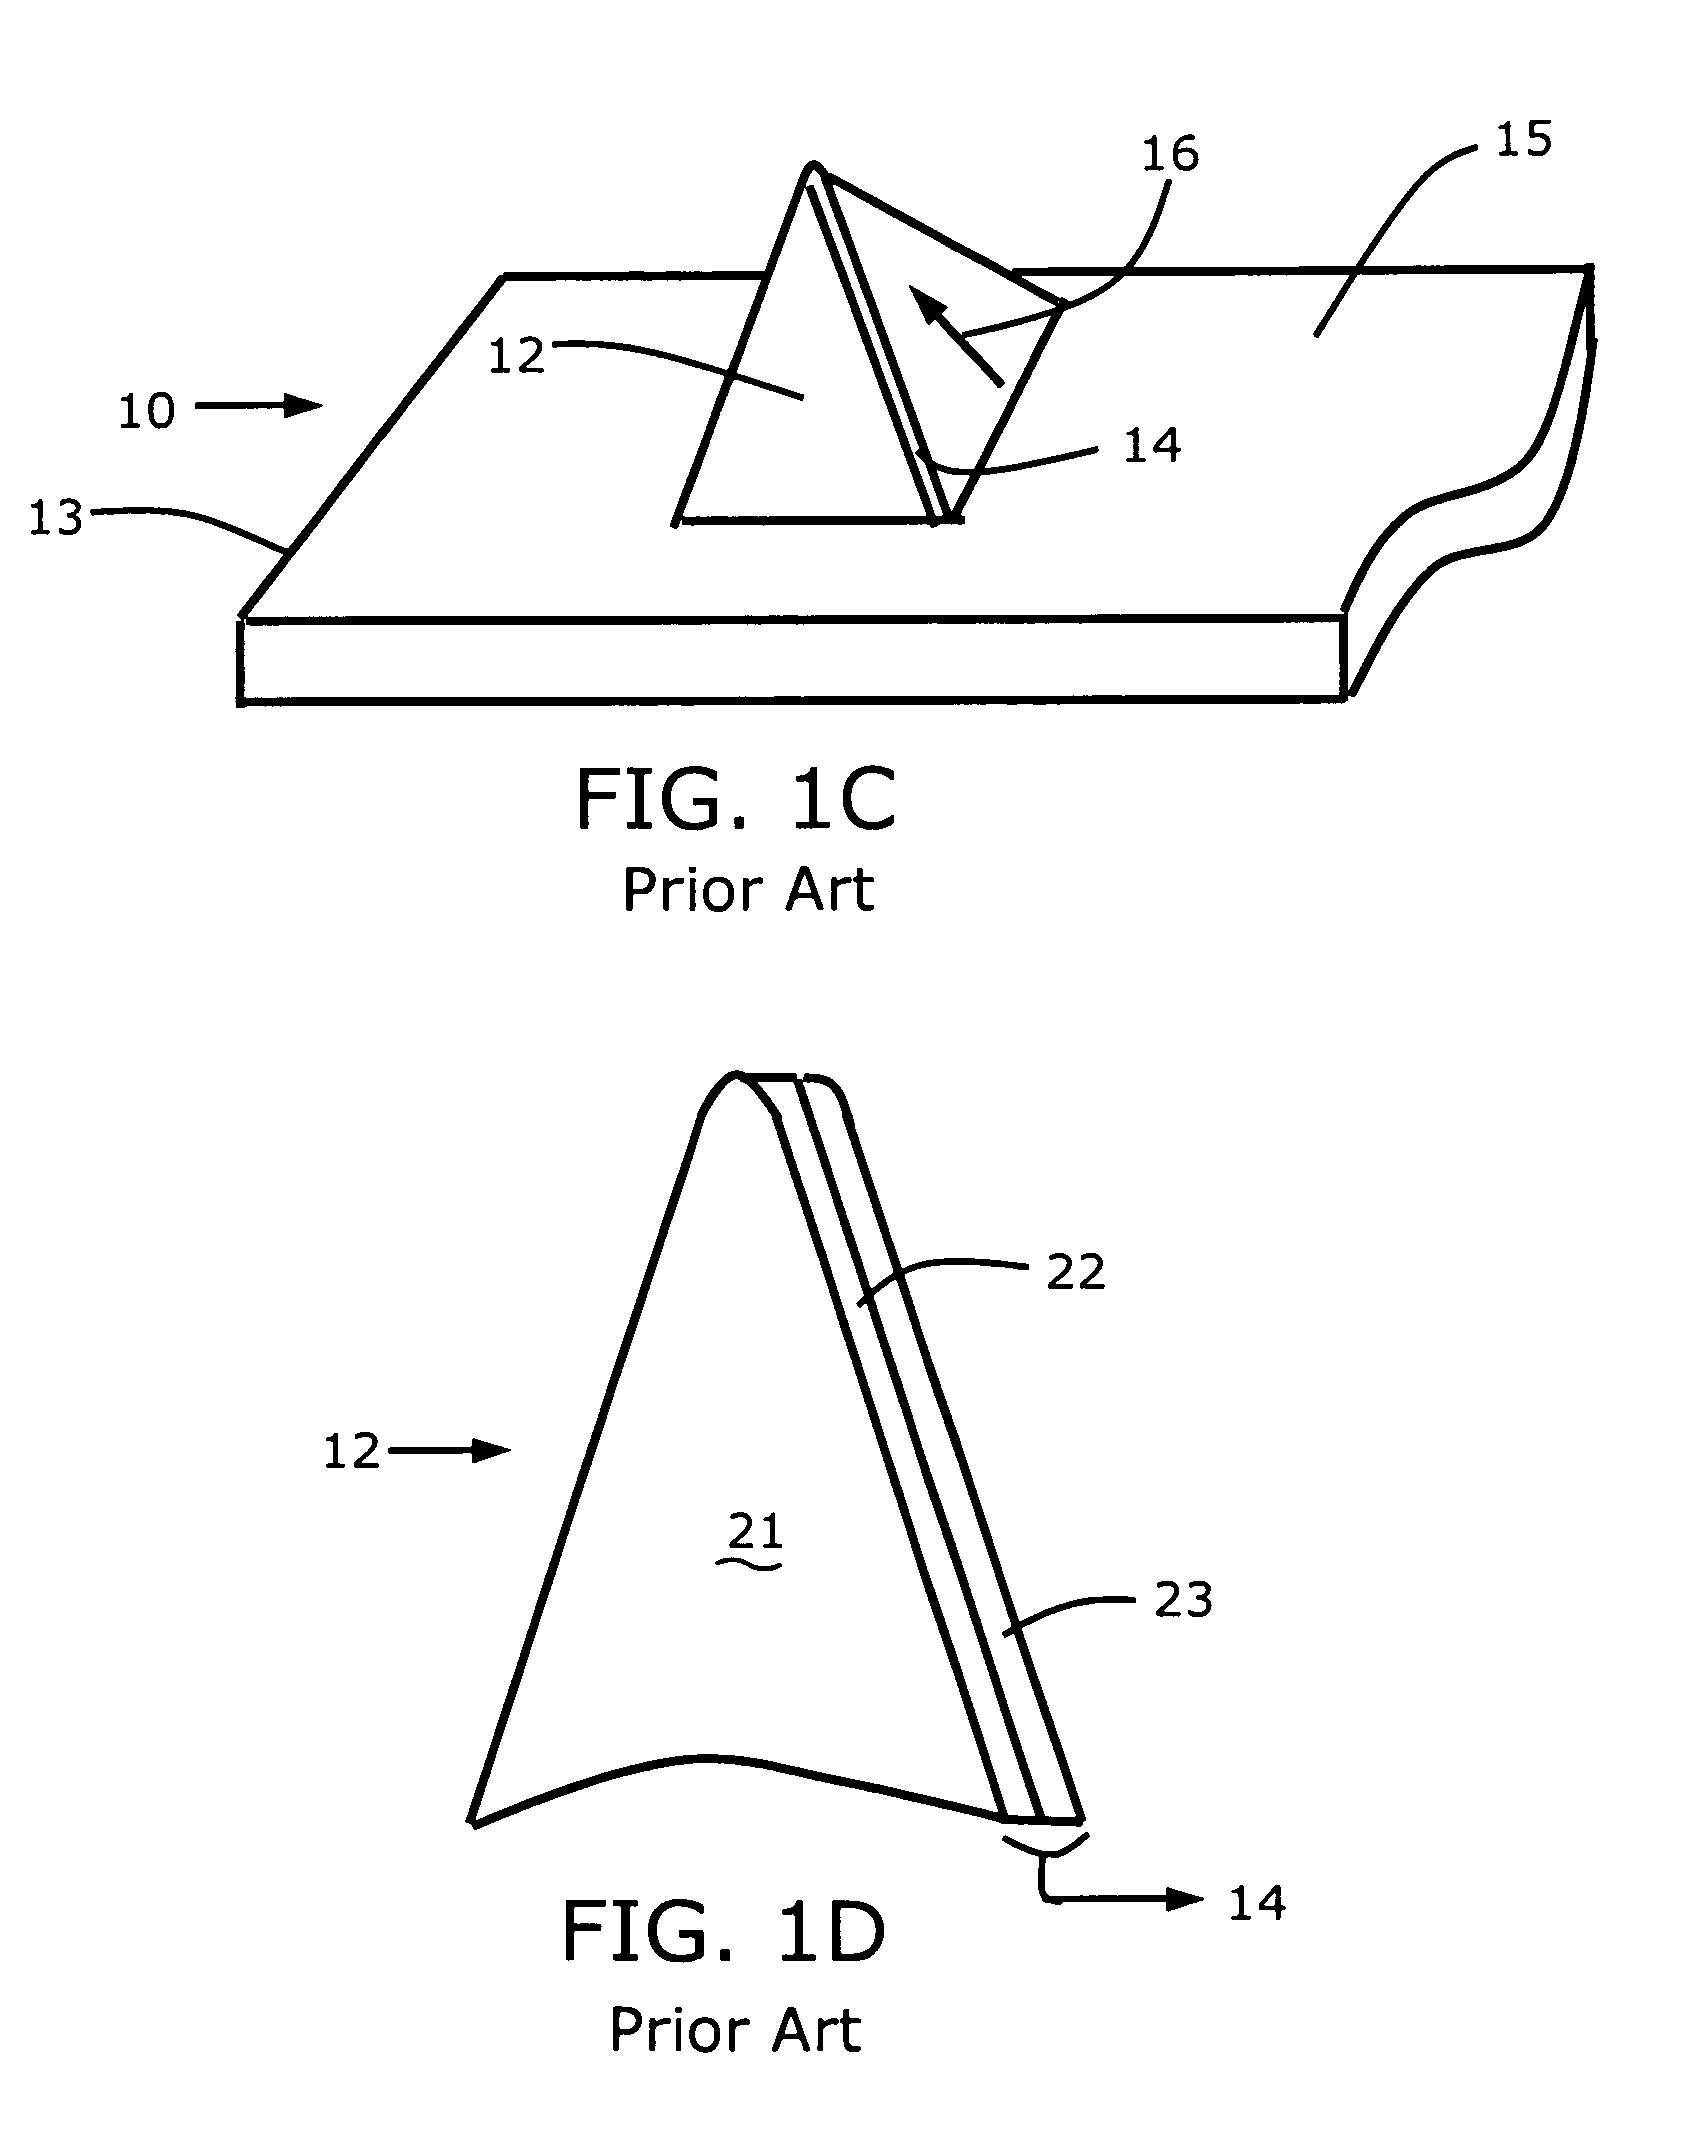 Magneto-optical device with an optically induced magnetization